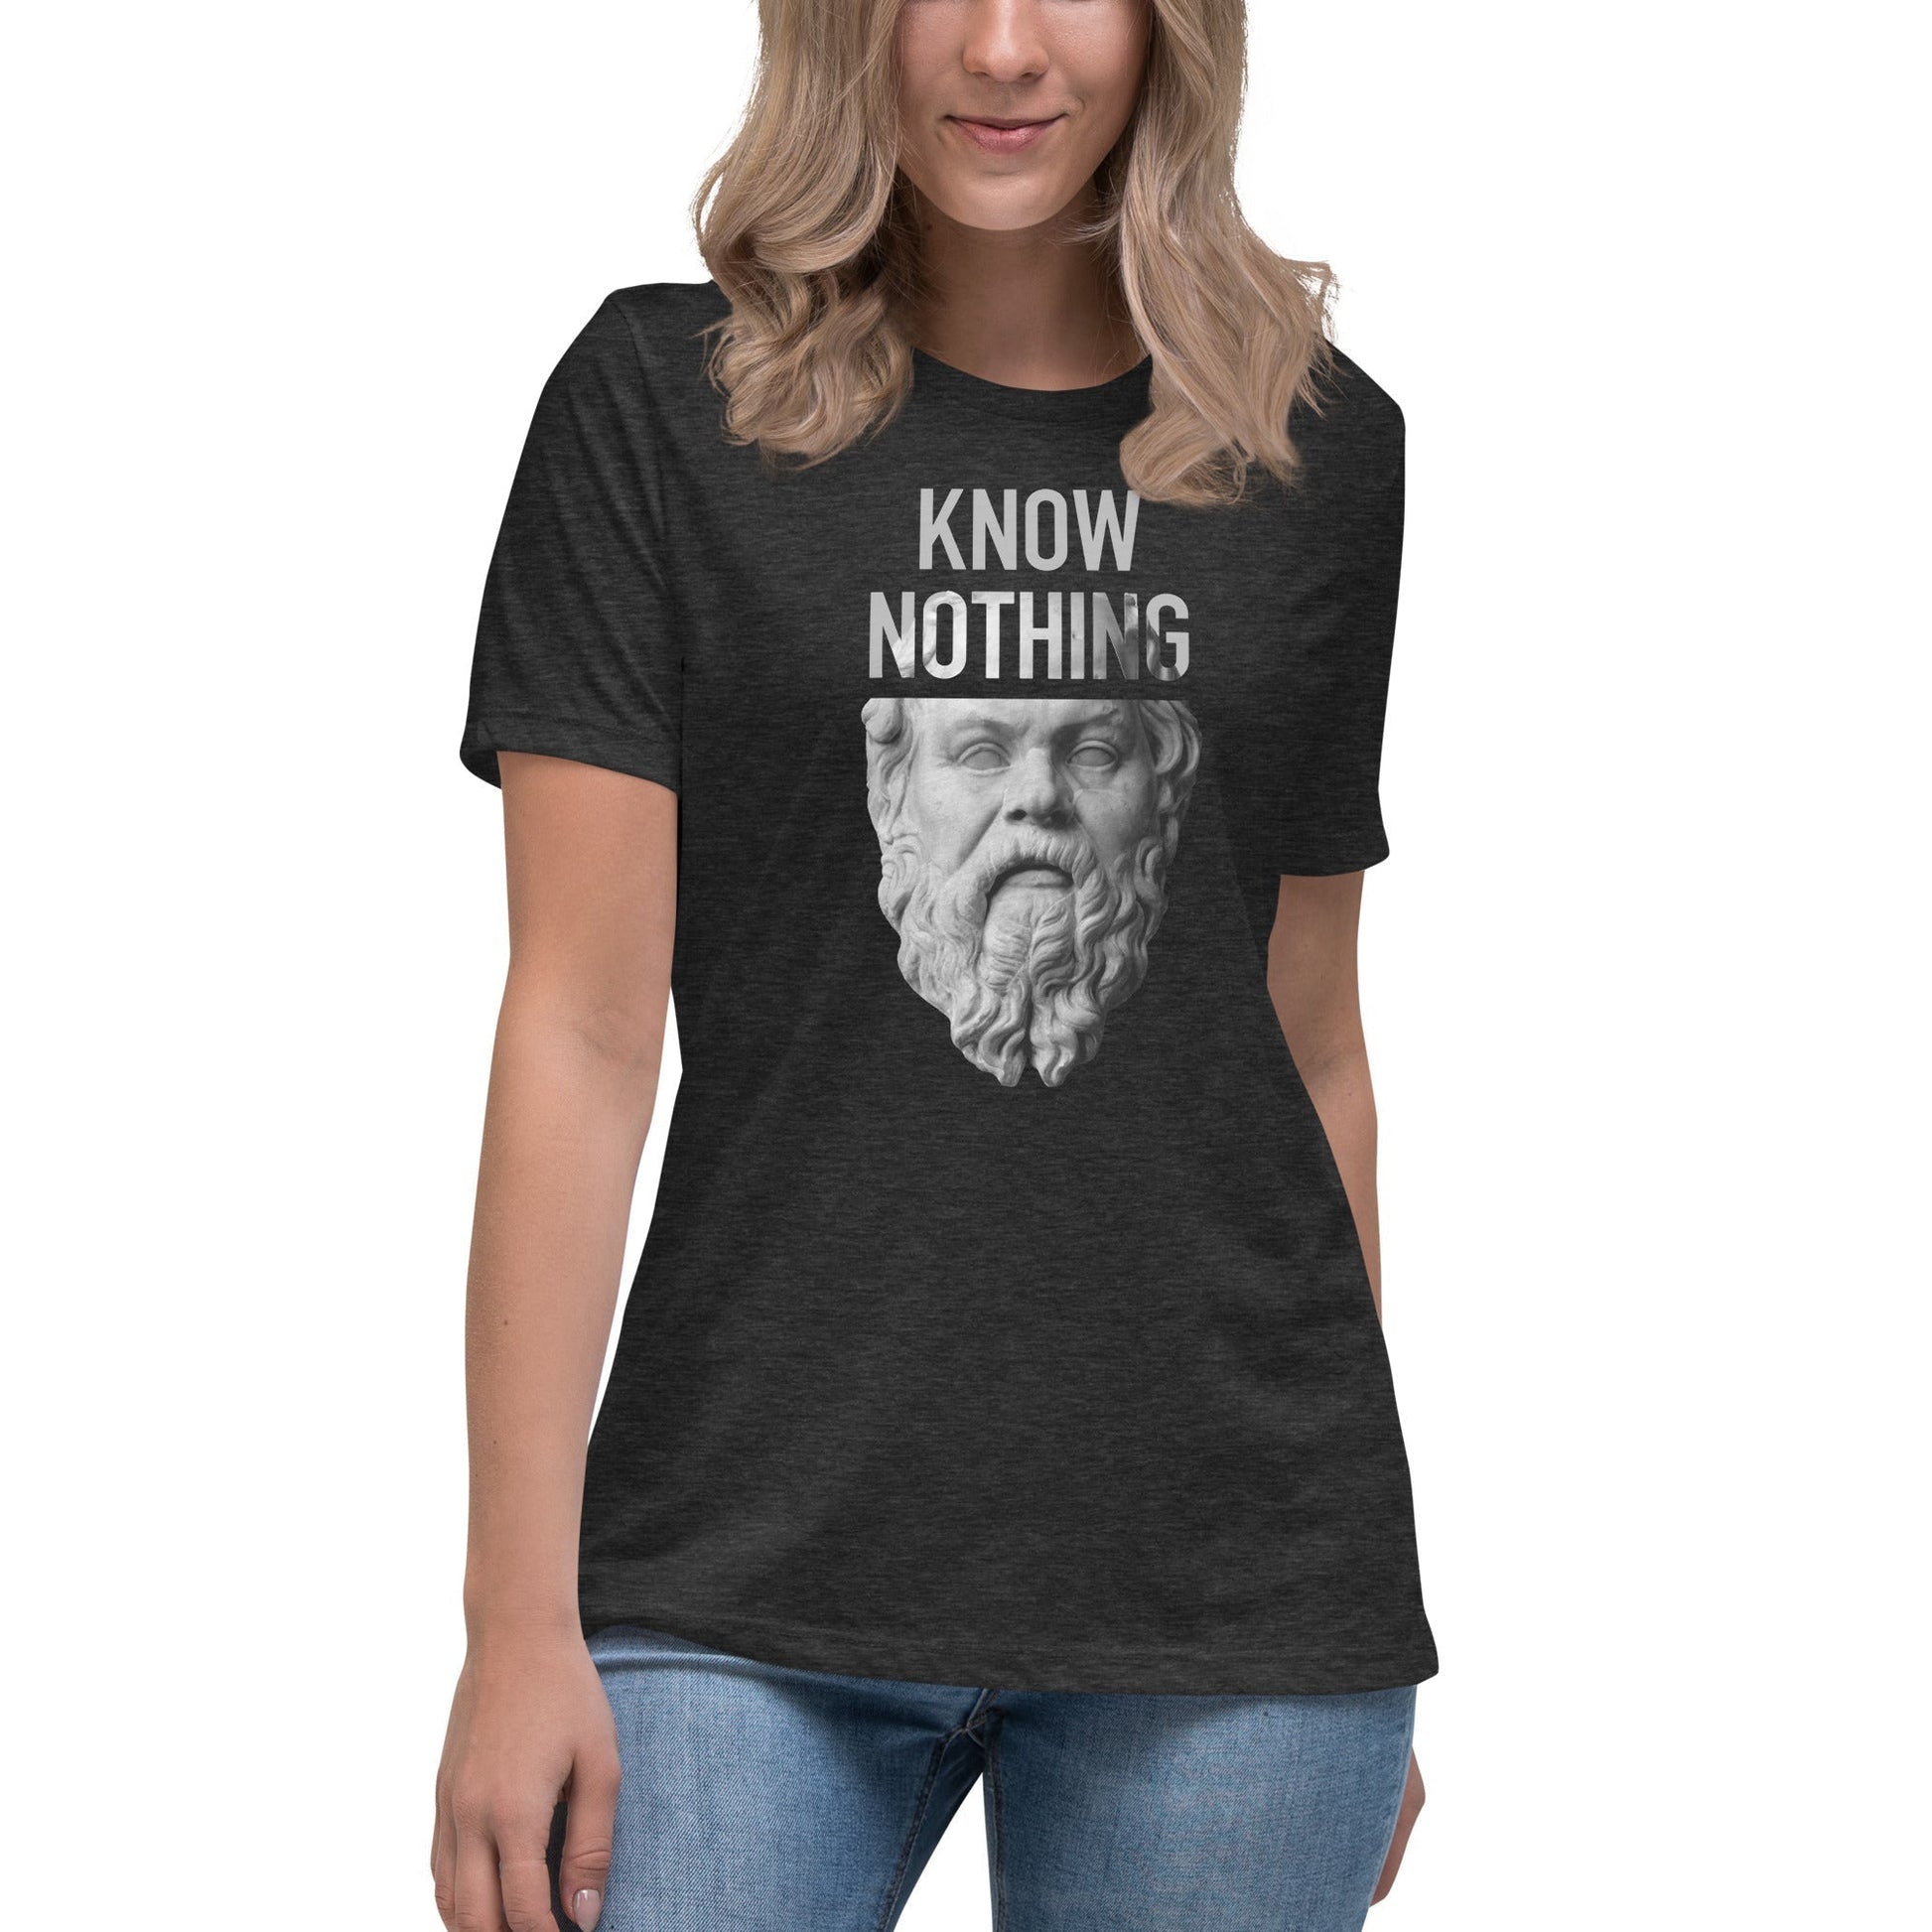 Socrates - Know Nothing - Women's T-Shirt